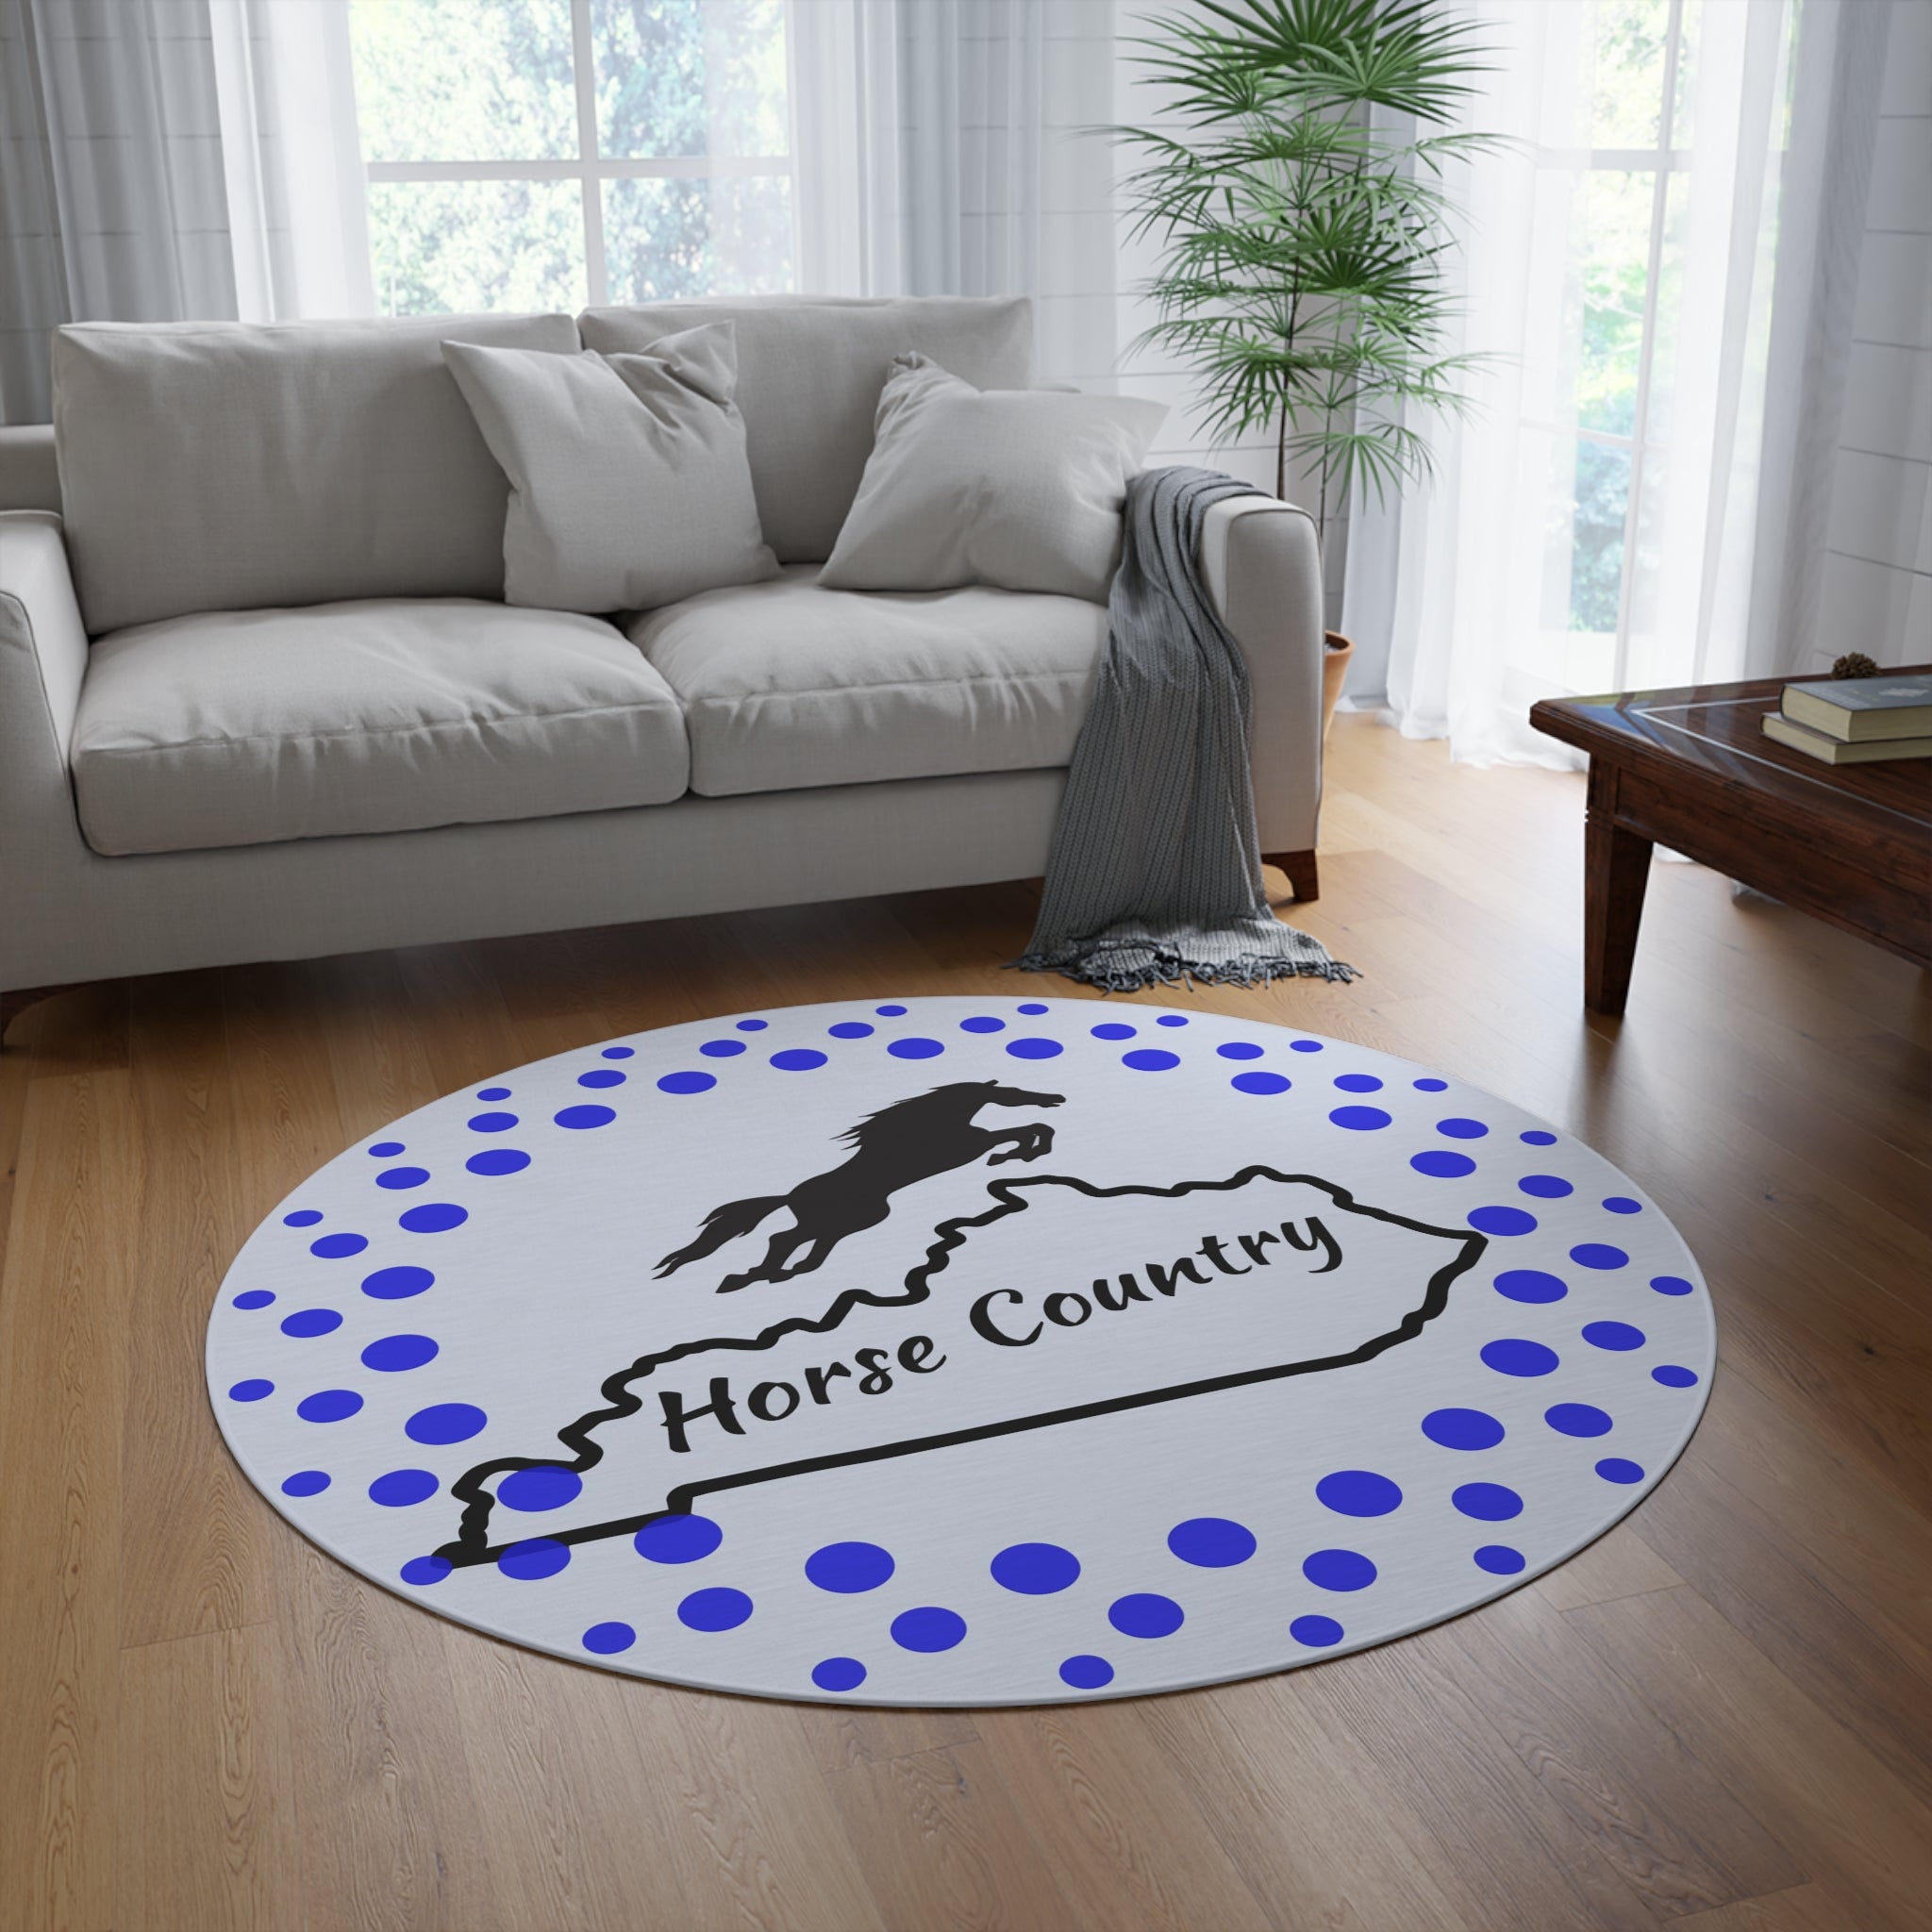 Kentucky is Horse Country Round Rug